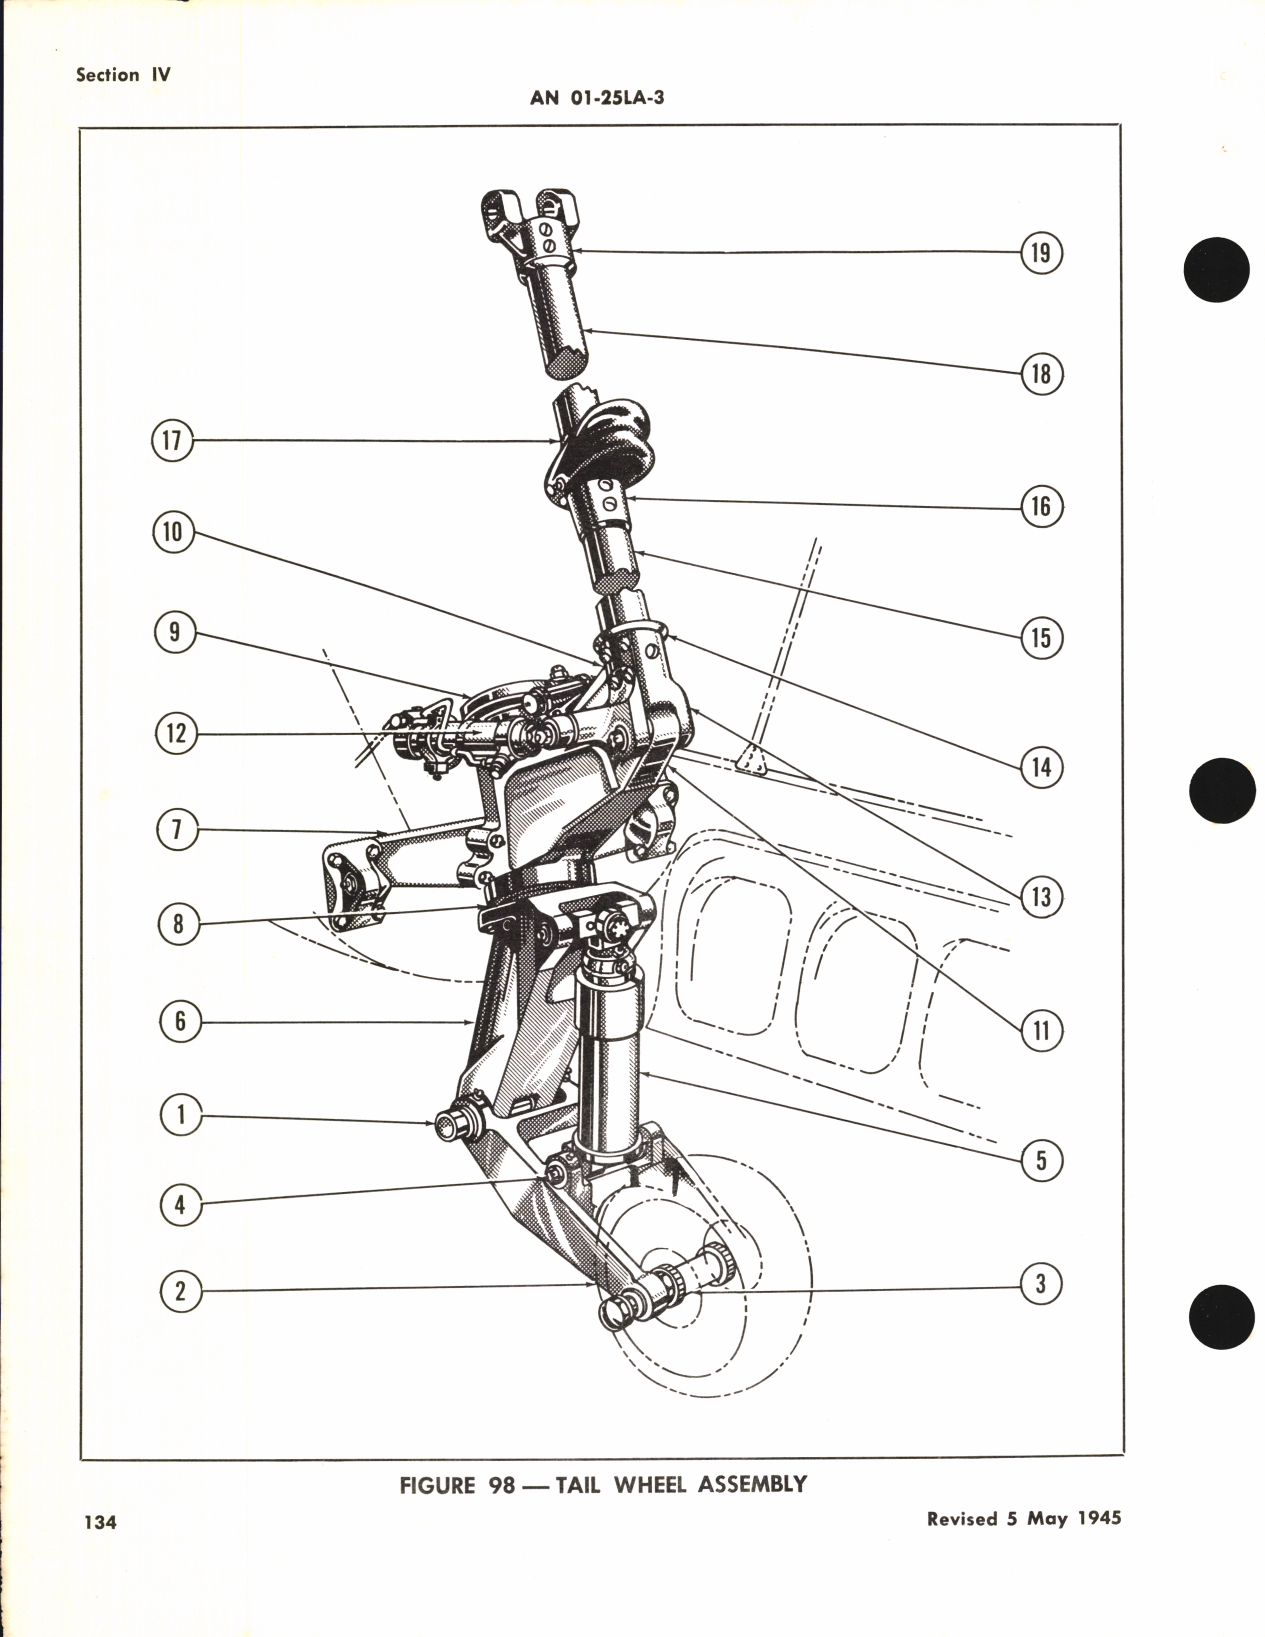 Sample page 8 from AirCorps Library document: Structural Repair Instructions for C-46, ZC-46A, C-46D, and C-46F